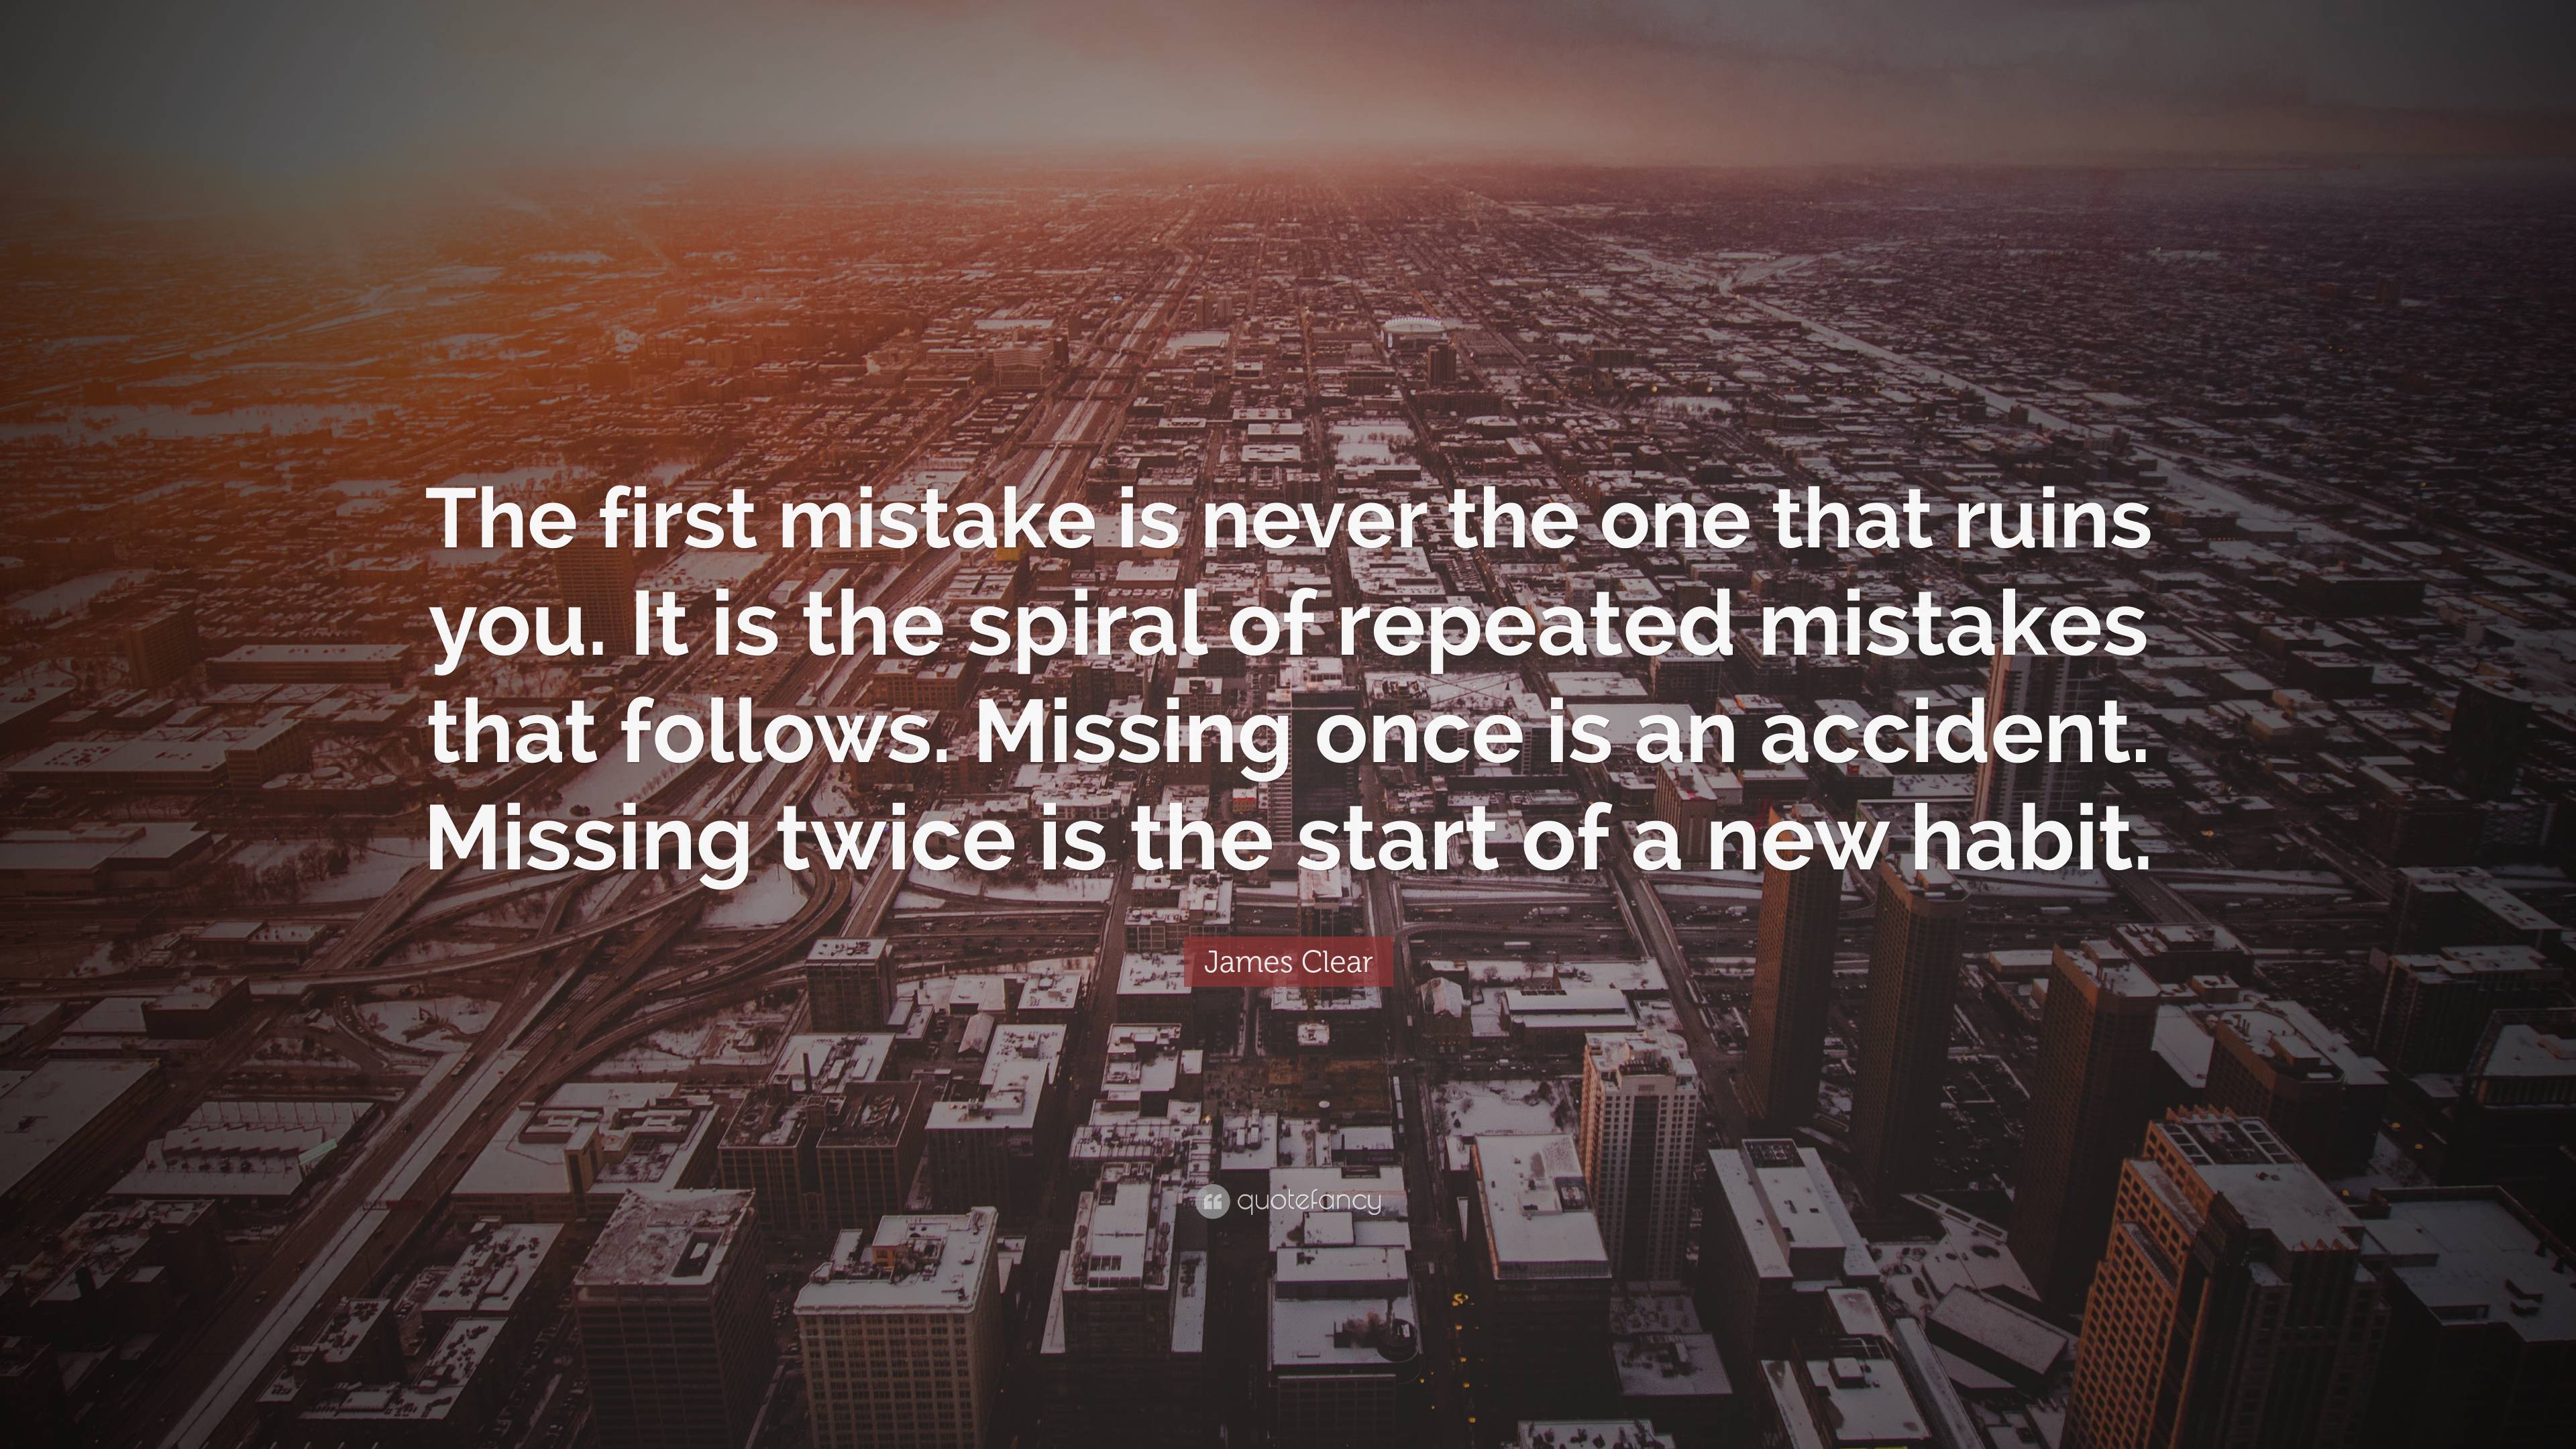 James Clear Quote: “The first mistake is never the one that ruins you ...